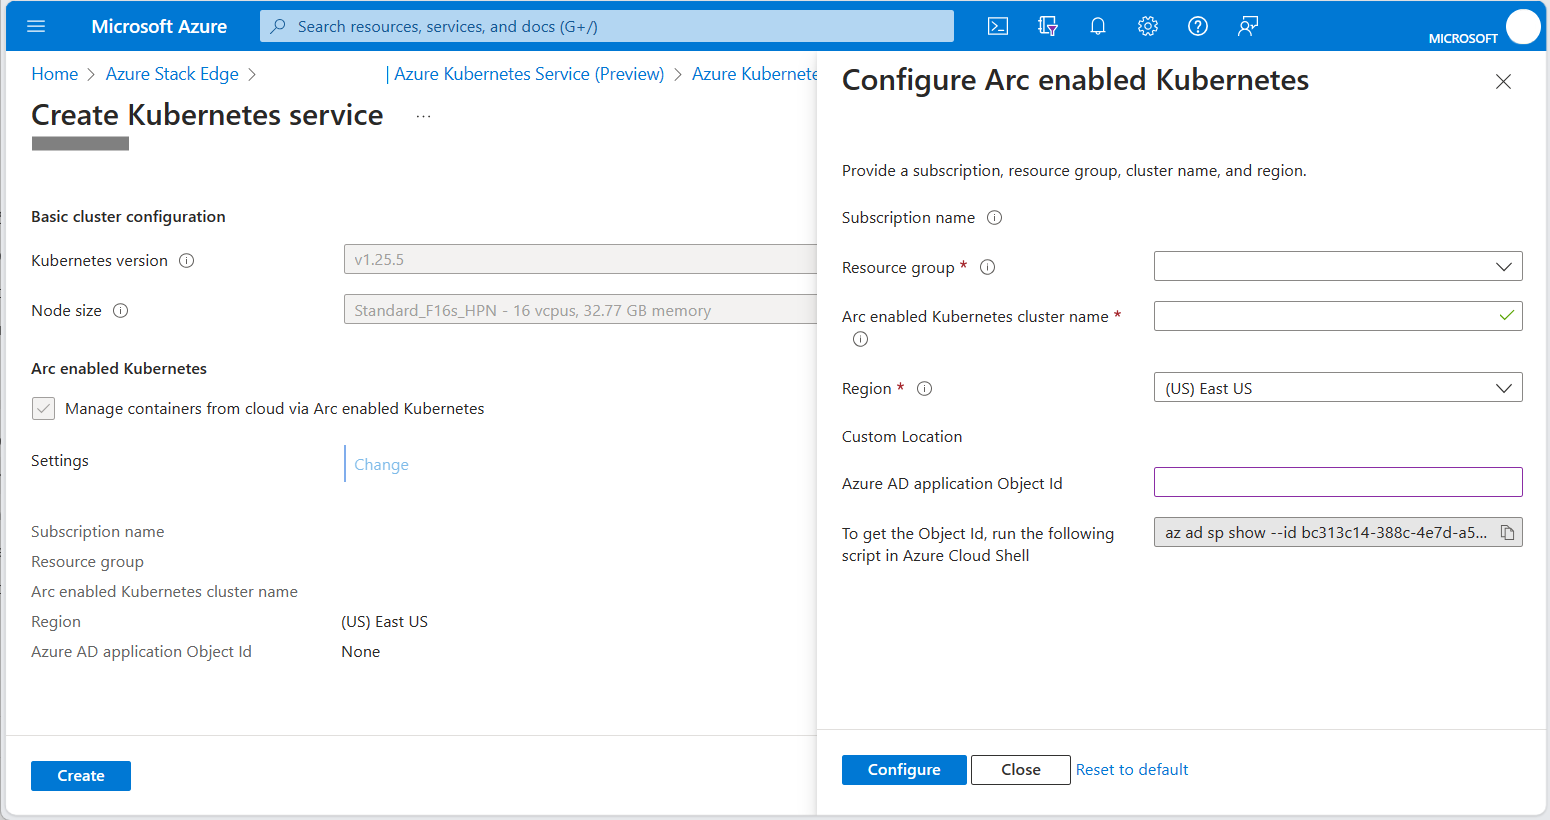 Screenshot of Configure Arc enabled Kubernetes pane, showing where to enter the custom location OID.